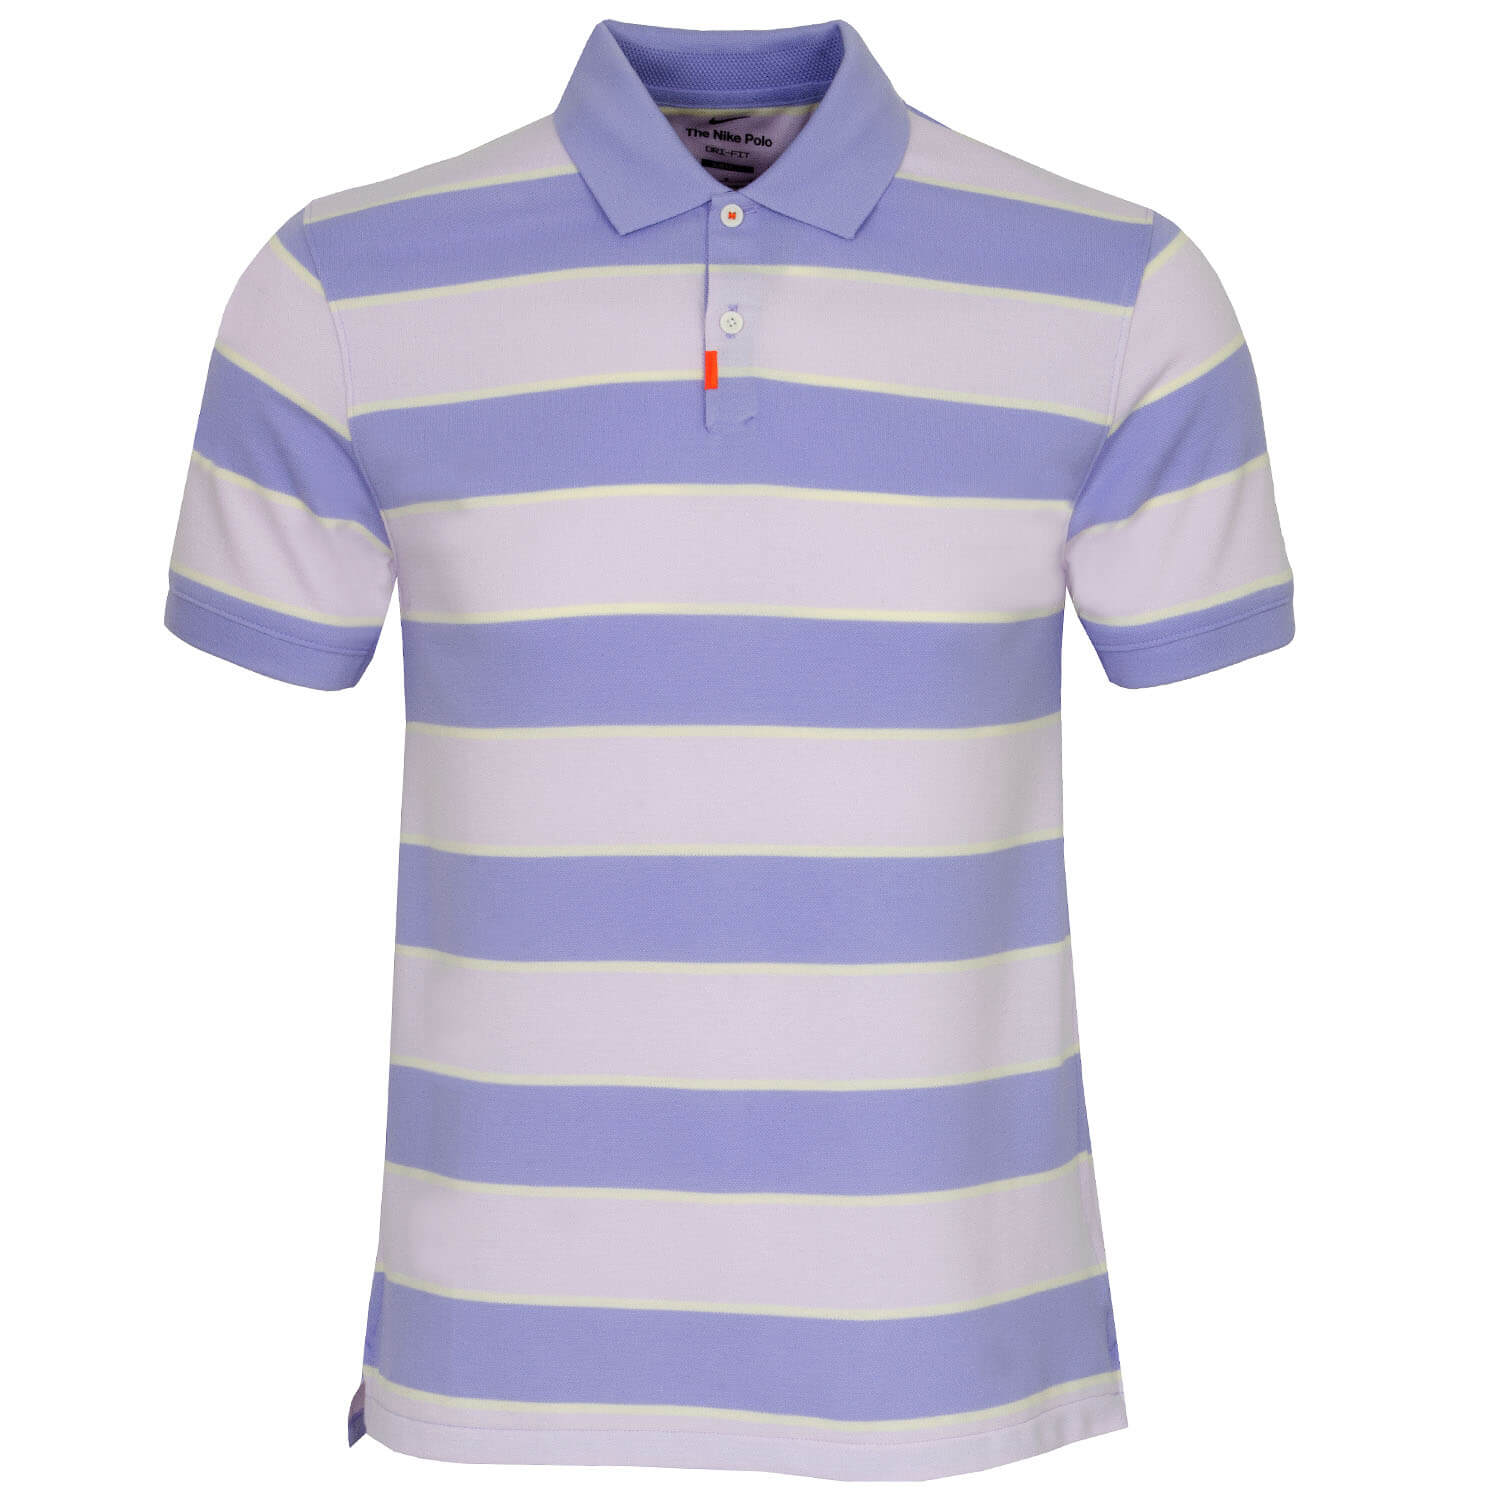 Nike The Polo Rugby Striped Golf Polo Shirt